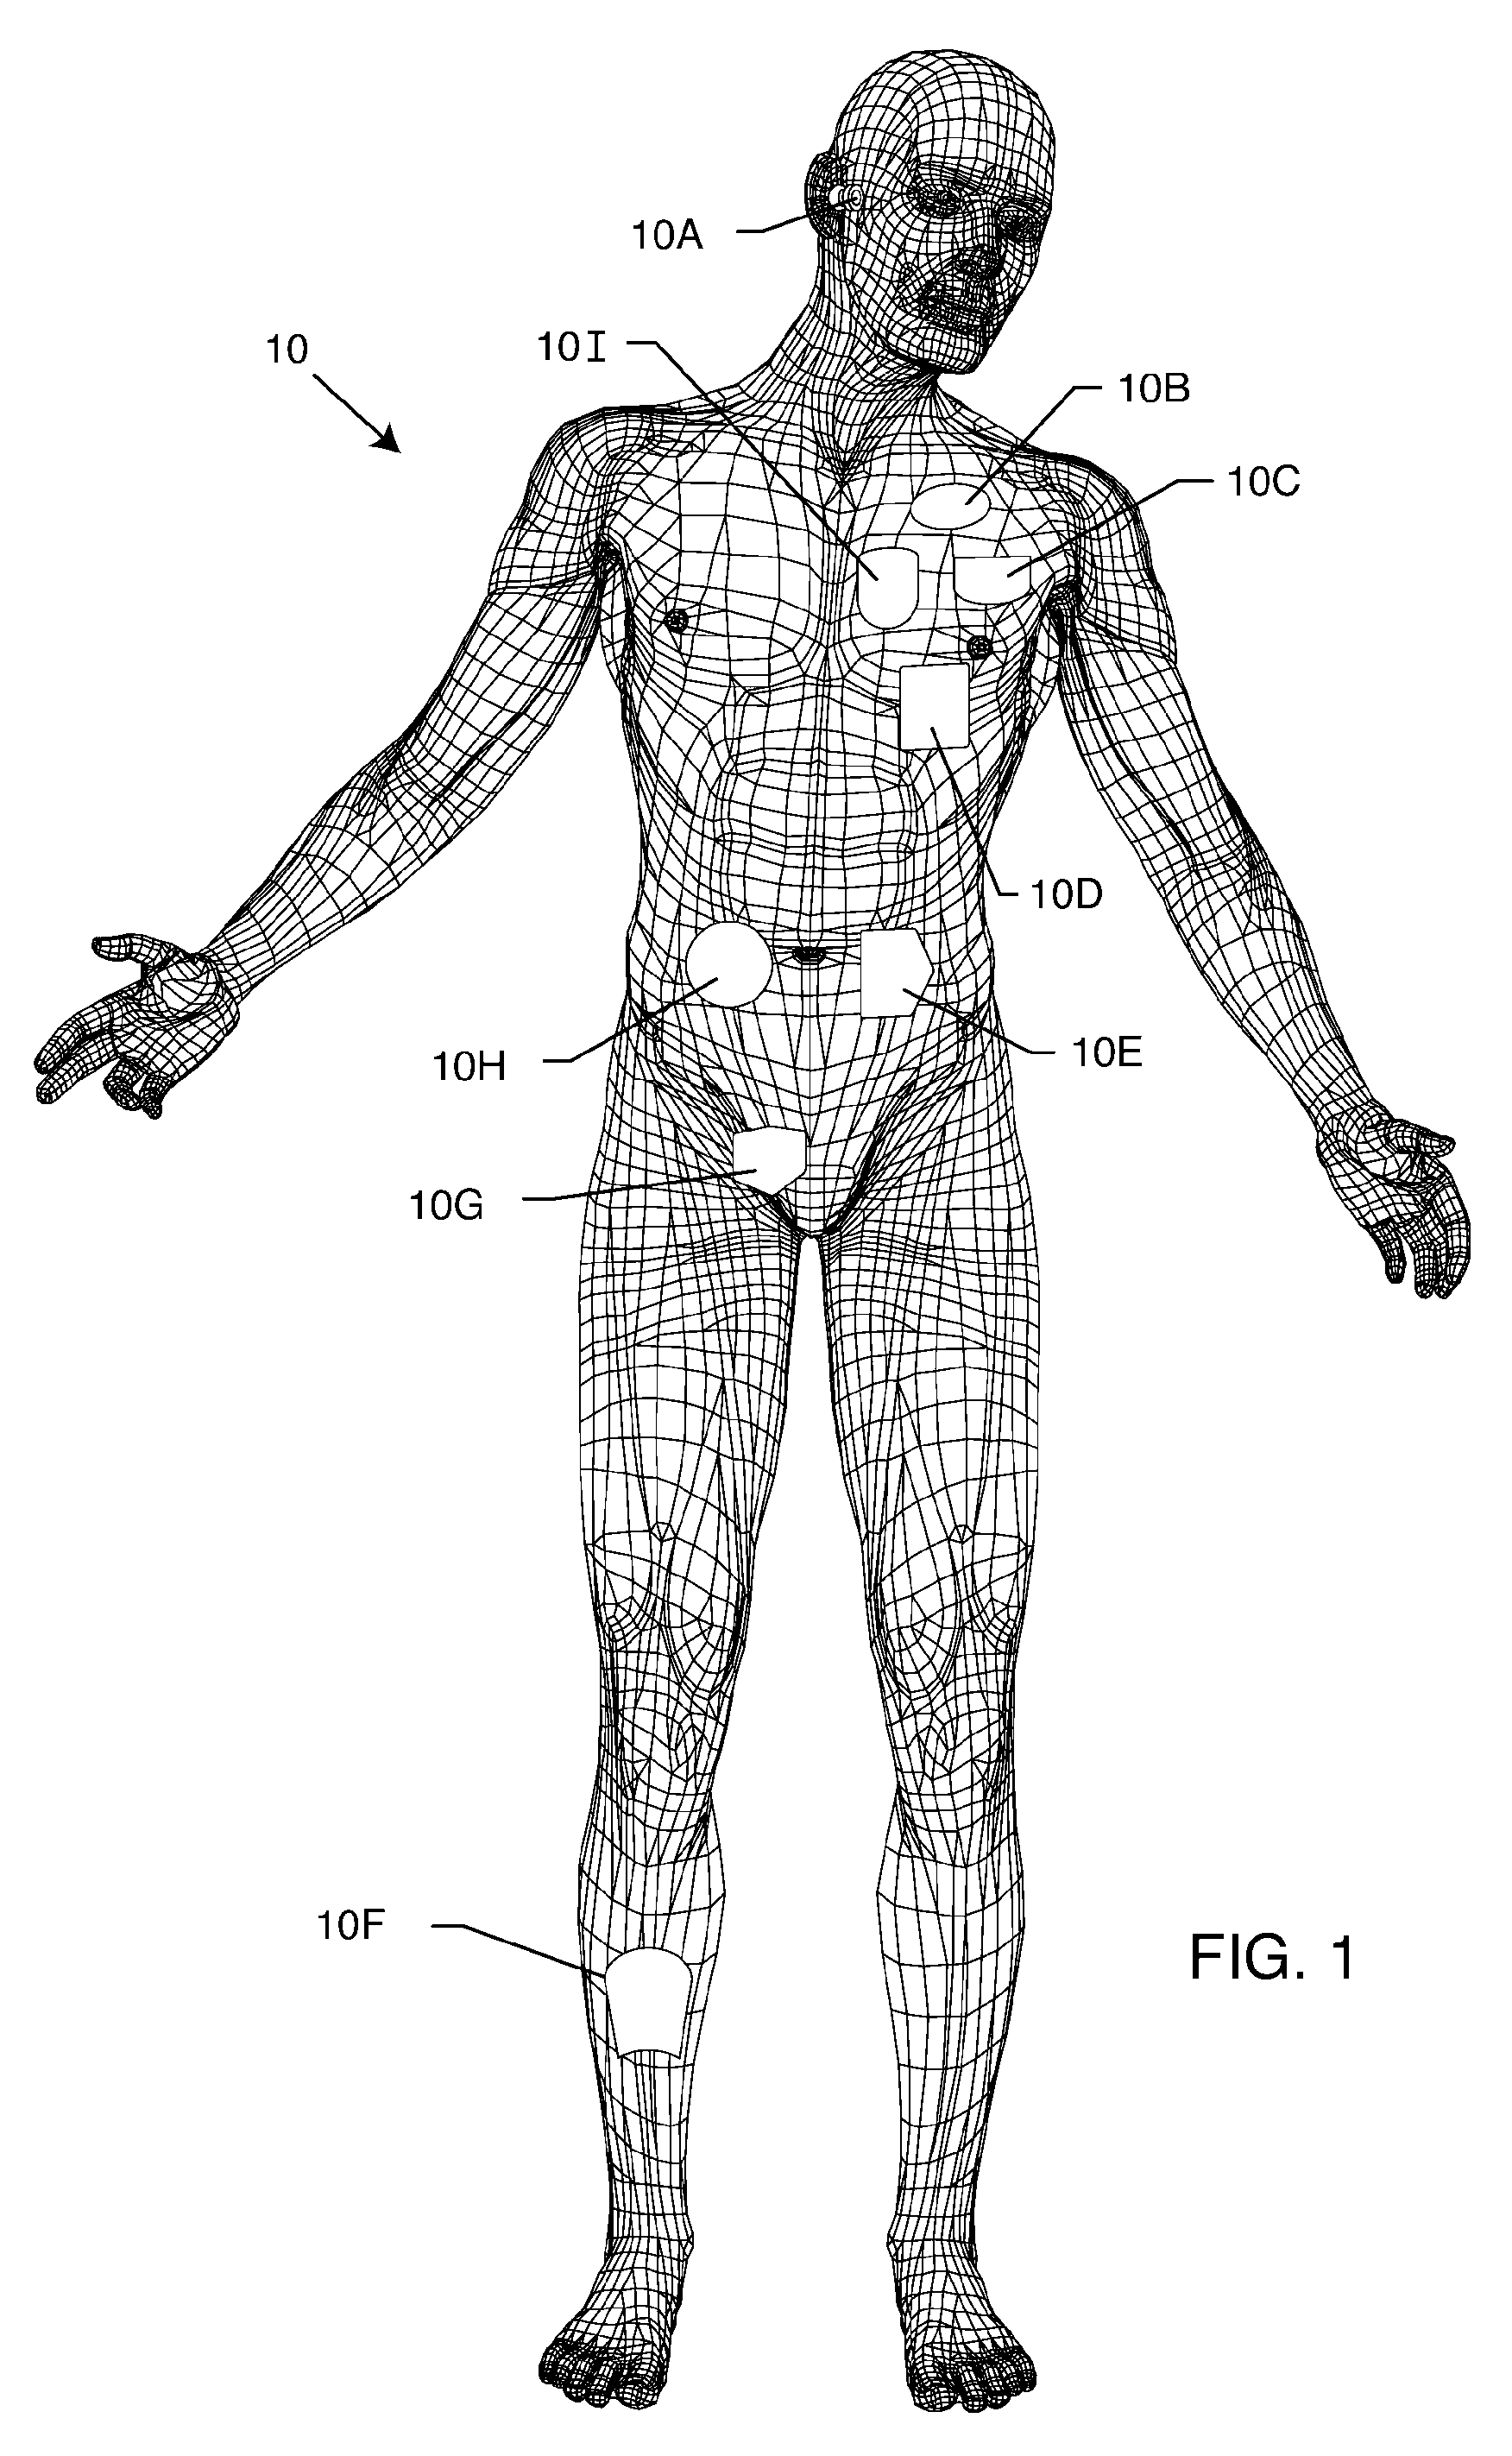 Device to protect an active implantable medical device feedthrough capacitor from stray laser weld strikes, and related manufacturing process